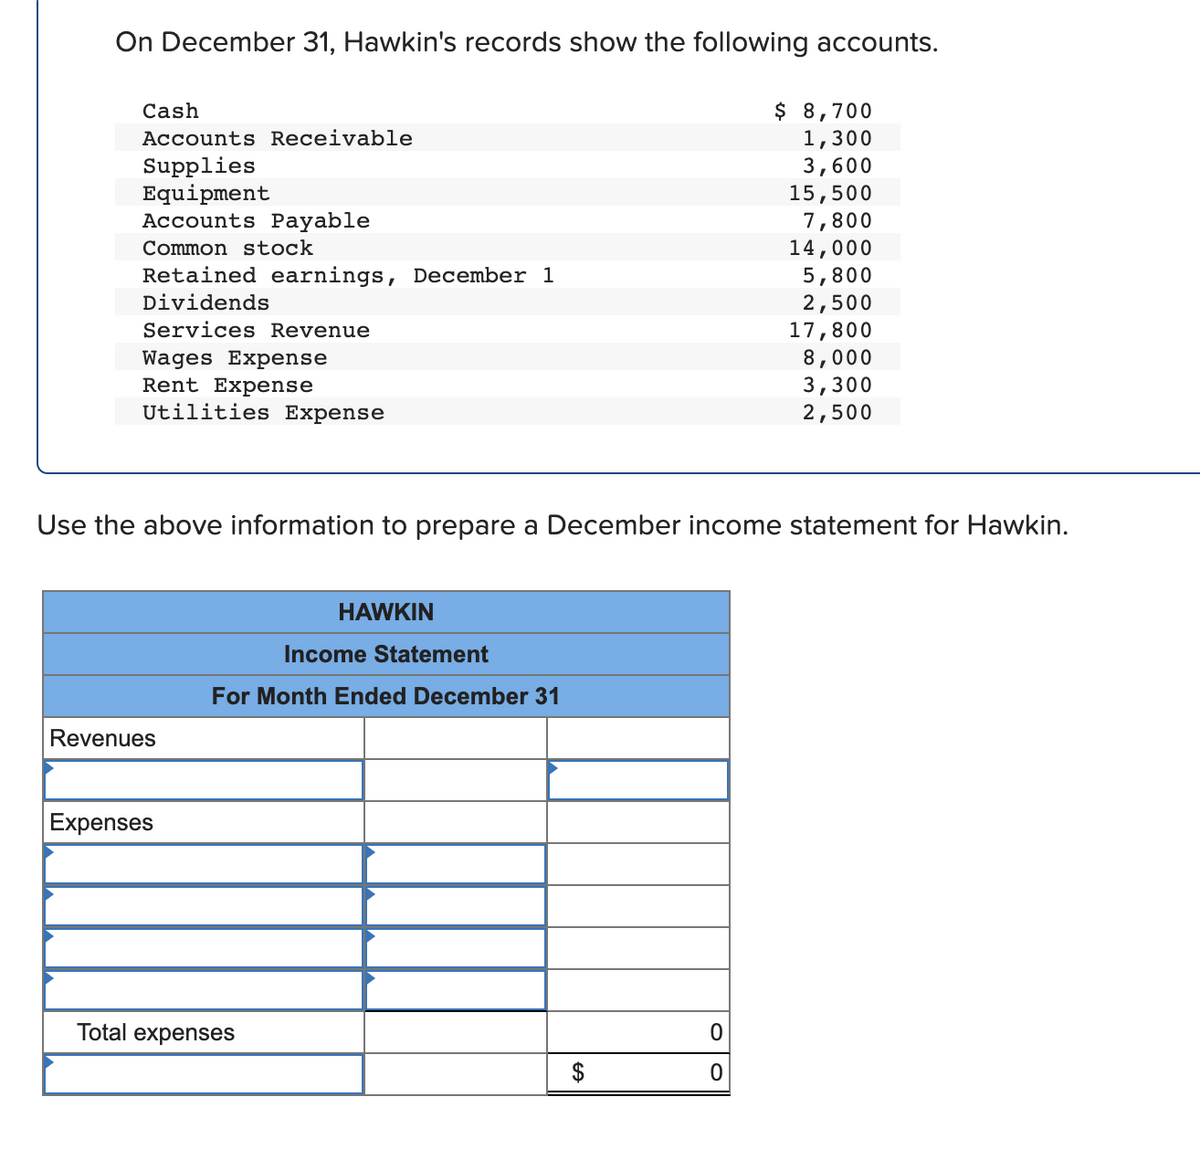 On December 31, Hawkin's records show the following accounts.
Cash
Accounts Receivable
Supplies
Equipment
Accounts Payable
Common stock
Retained earnings, December 1
Dividends
Services Revenue
Wages Expense
Rent Expense
Utilities Expense
Use the above information to prepare a December income statement for Hawkin.
Revenues
Expenses
HAWKIN
Income Statement
For Month Ended December 31
Total expenses
$
$ 8,700
1,300
3,600
15,500
7,800
14,000
5,800
2,500
17,800
8,000
3,300
2,500
0
0